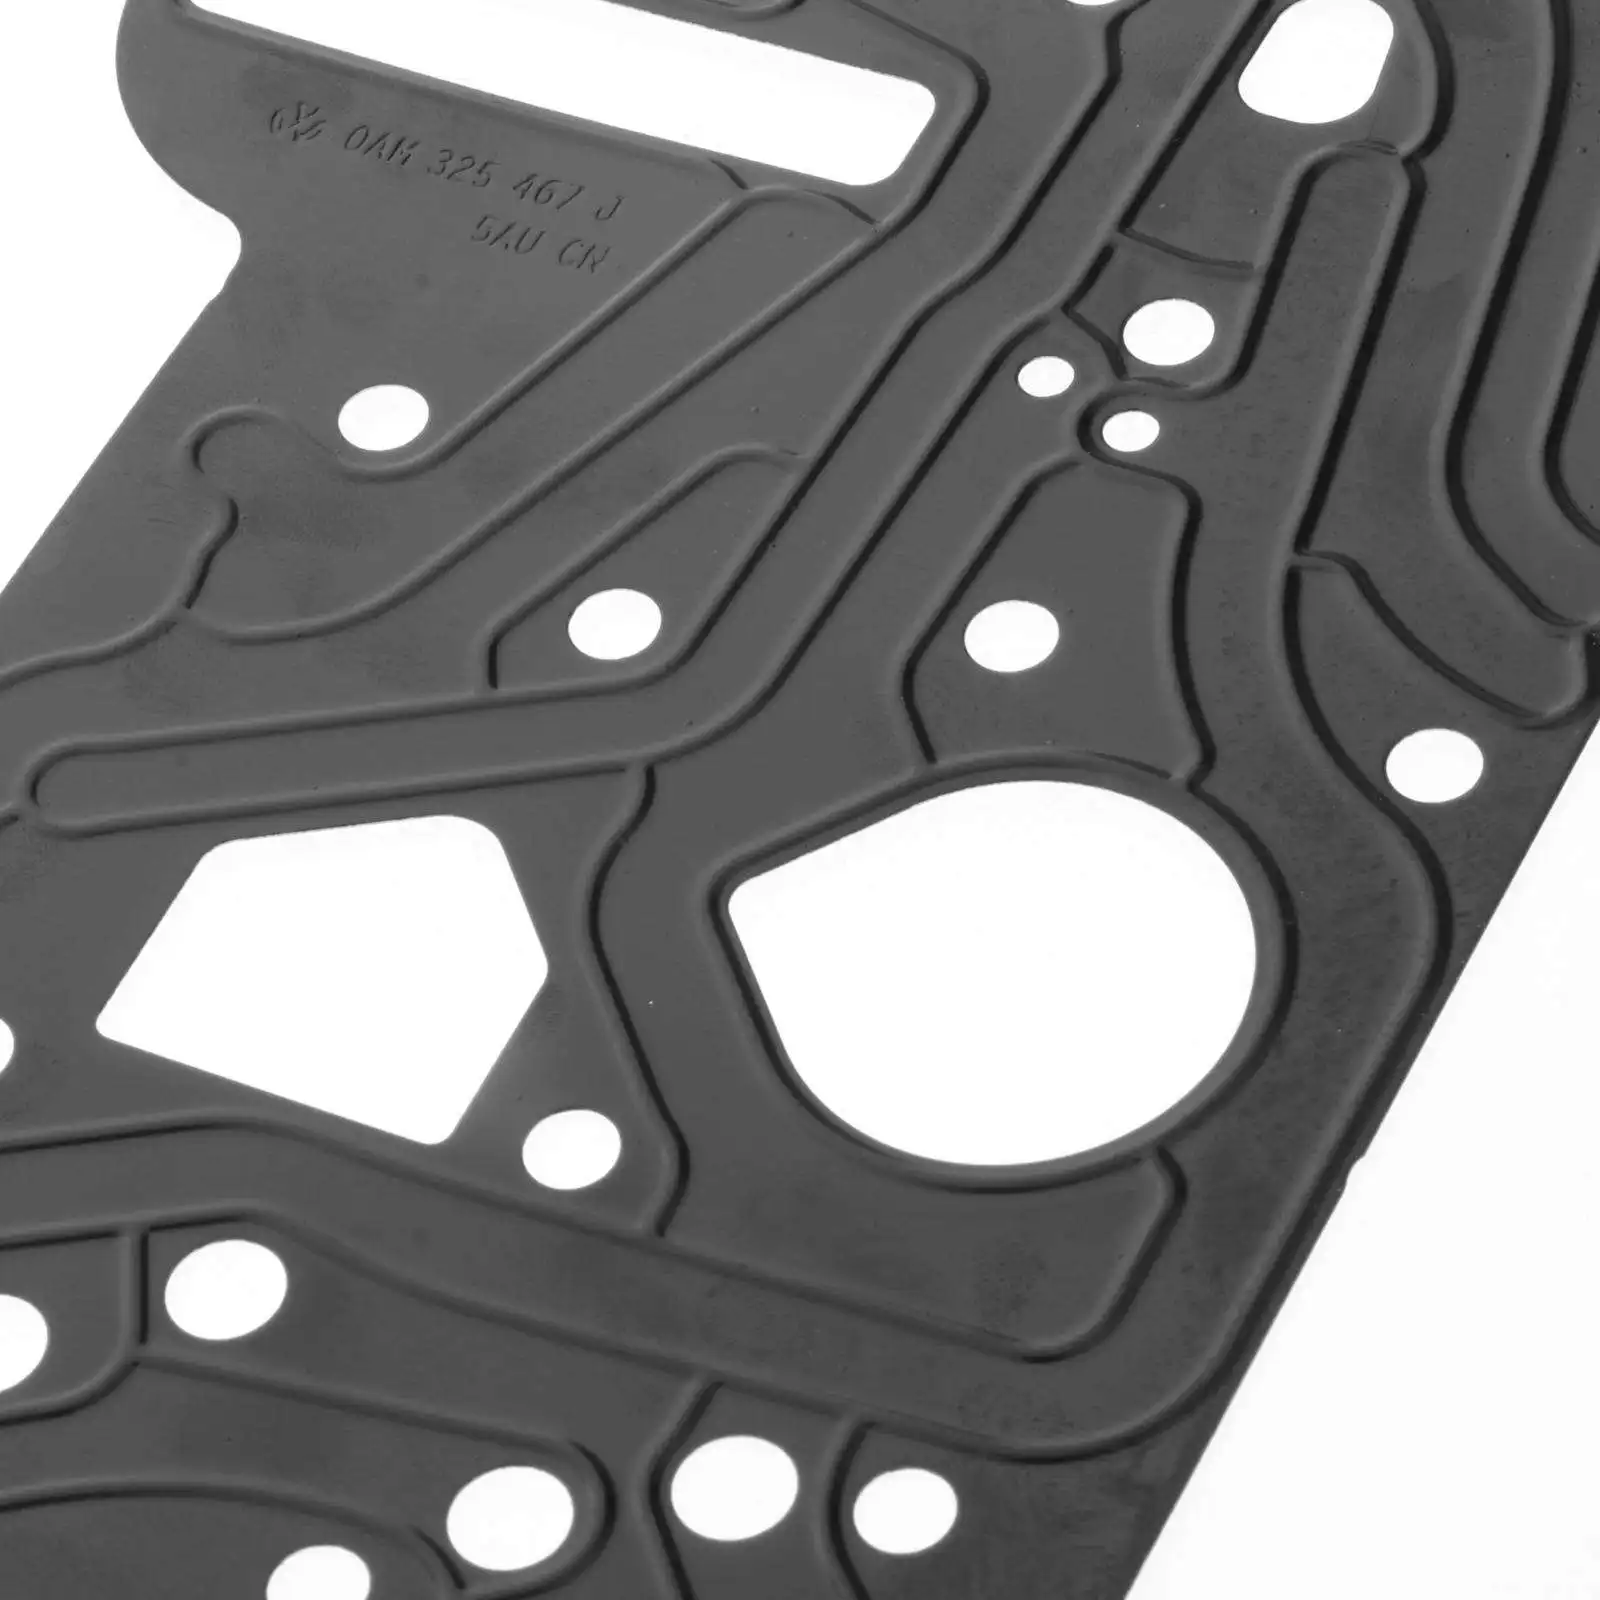 0AM DQ200 Aluminum Transmission Valve Body Plate Gasket for VW for Sagitar for Golf 965747A Stable & Reliable